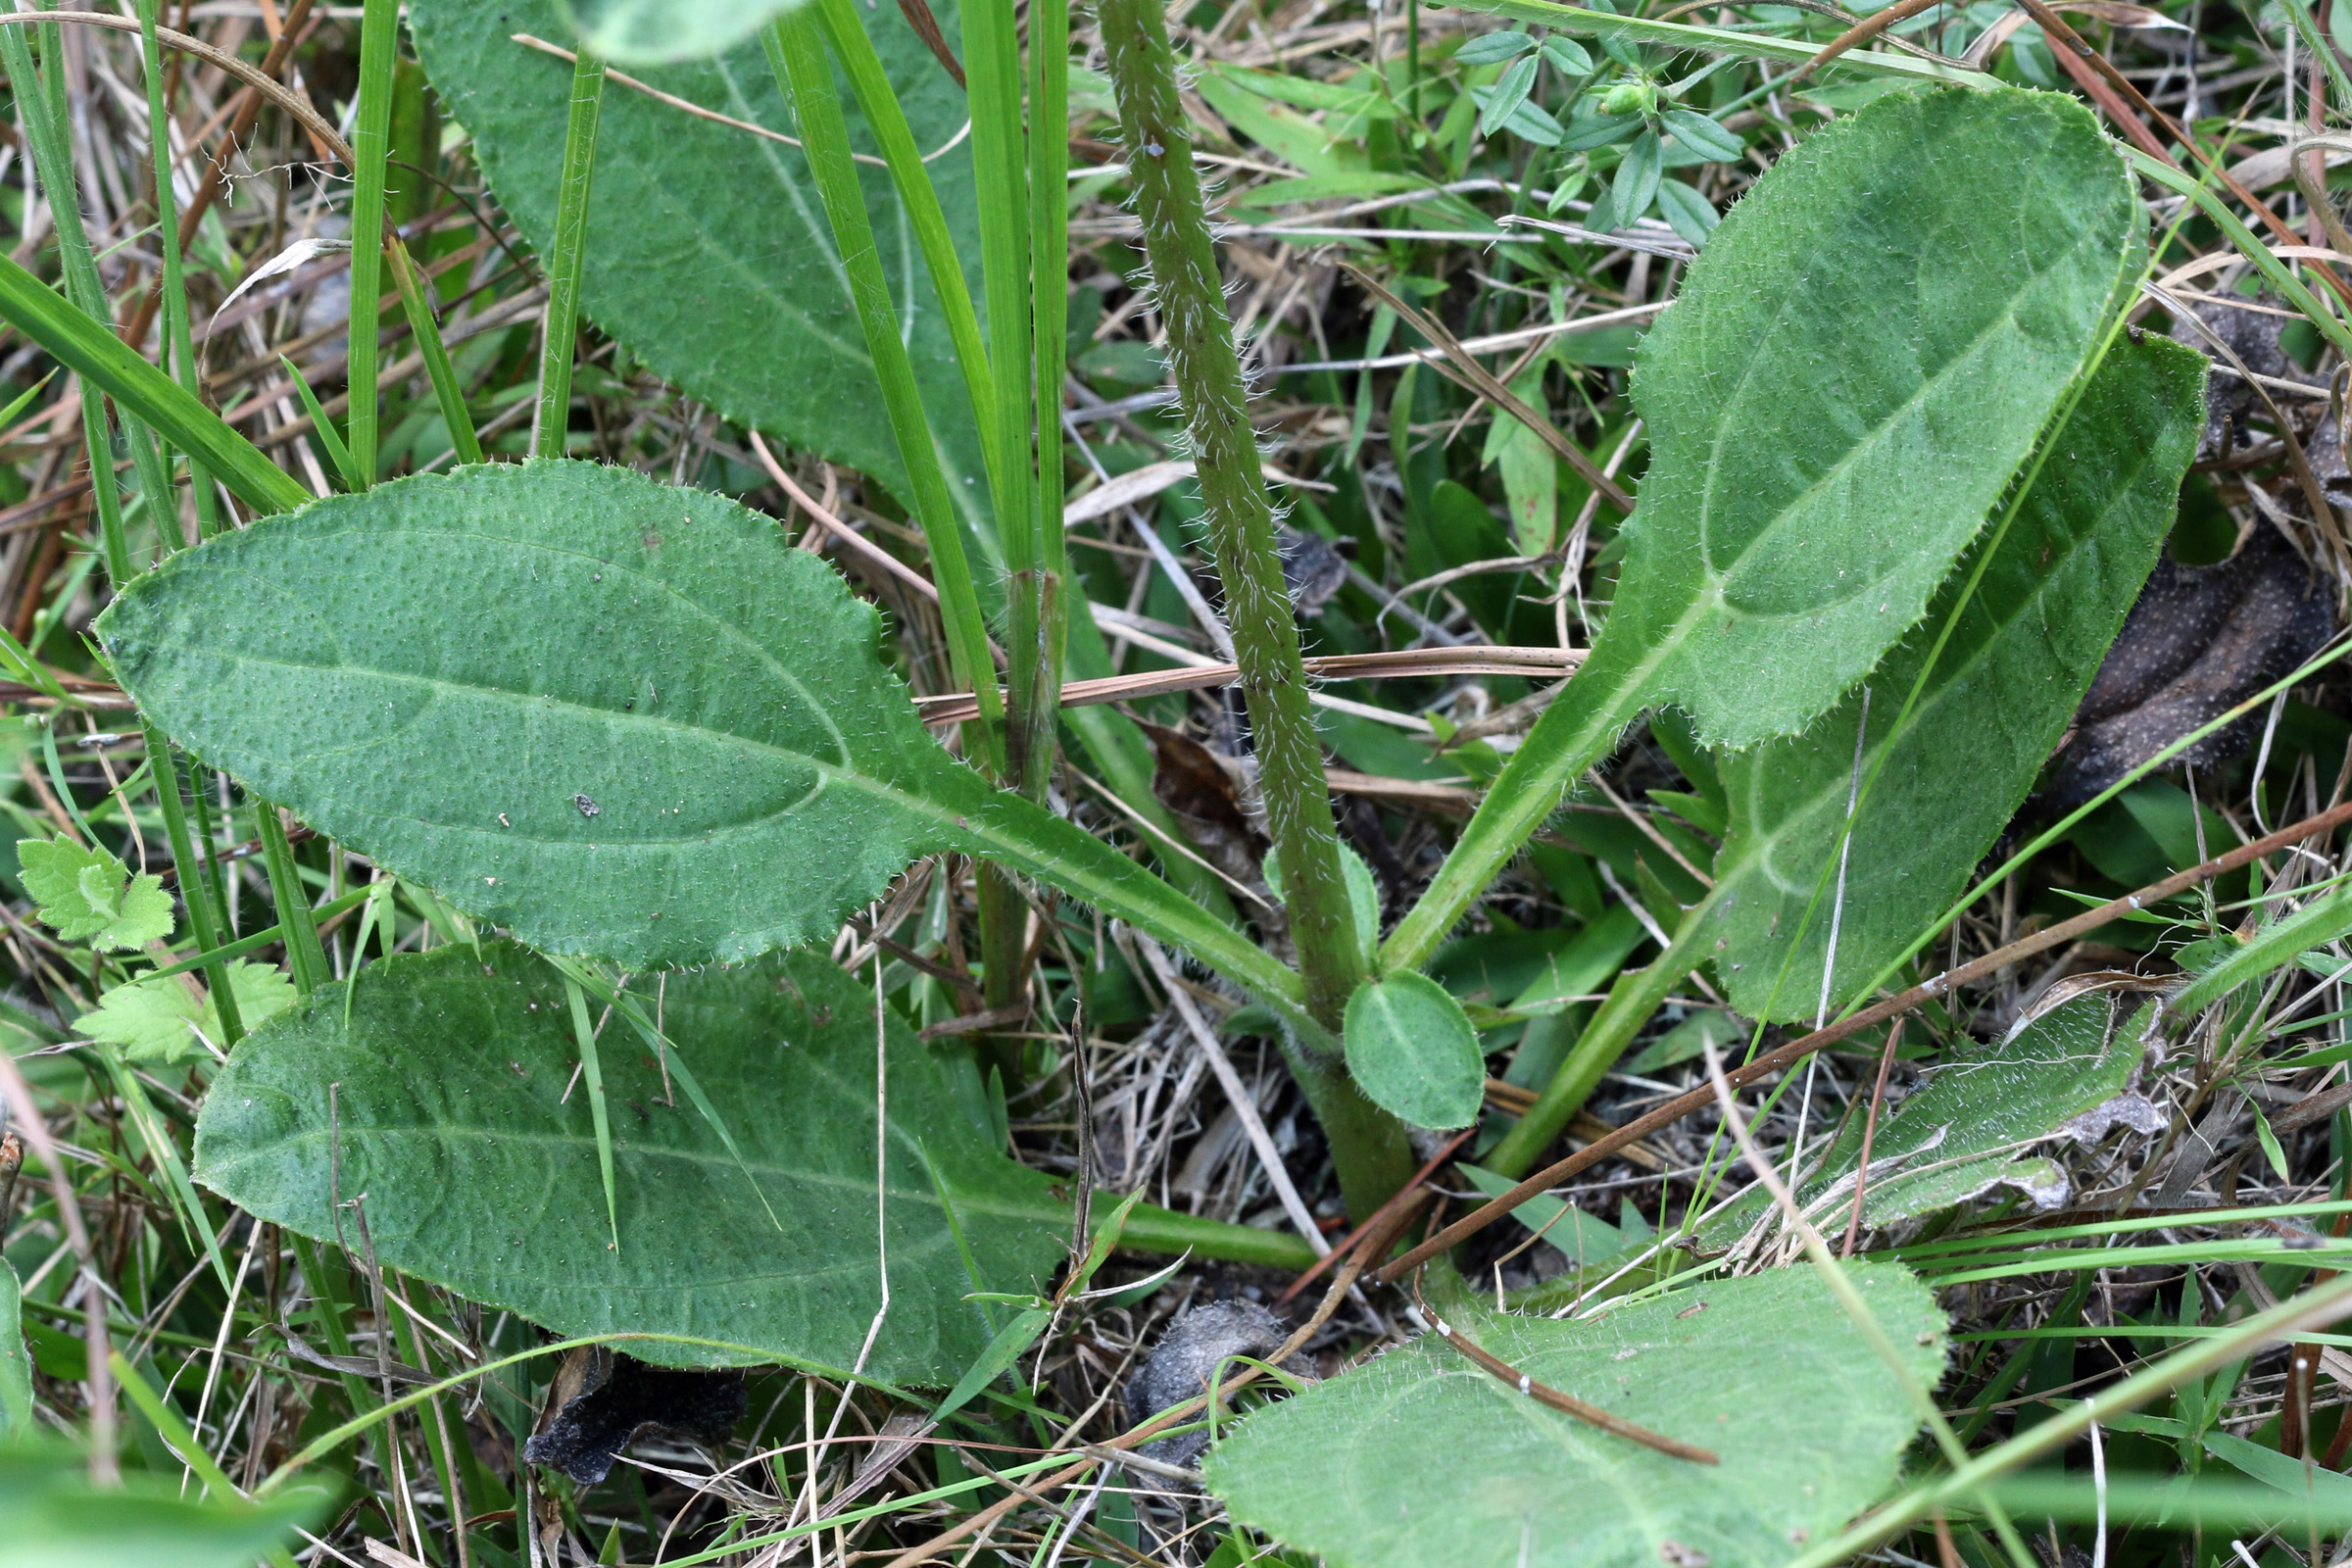 The Scientific Name is Helianthus atrorubens. You will likely hear them called Purpledisk Sunflower, Appalachian Sunflower. This picture shows the Leaves are mostly basal, coarse, hairy with winged petioles. of Helianthus atrorubens